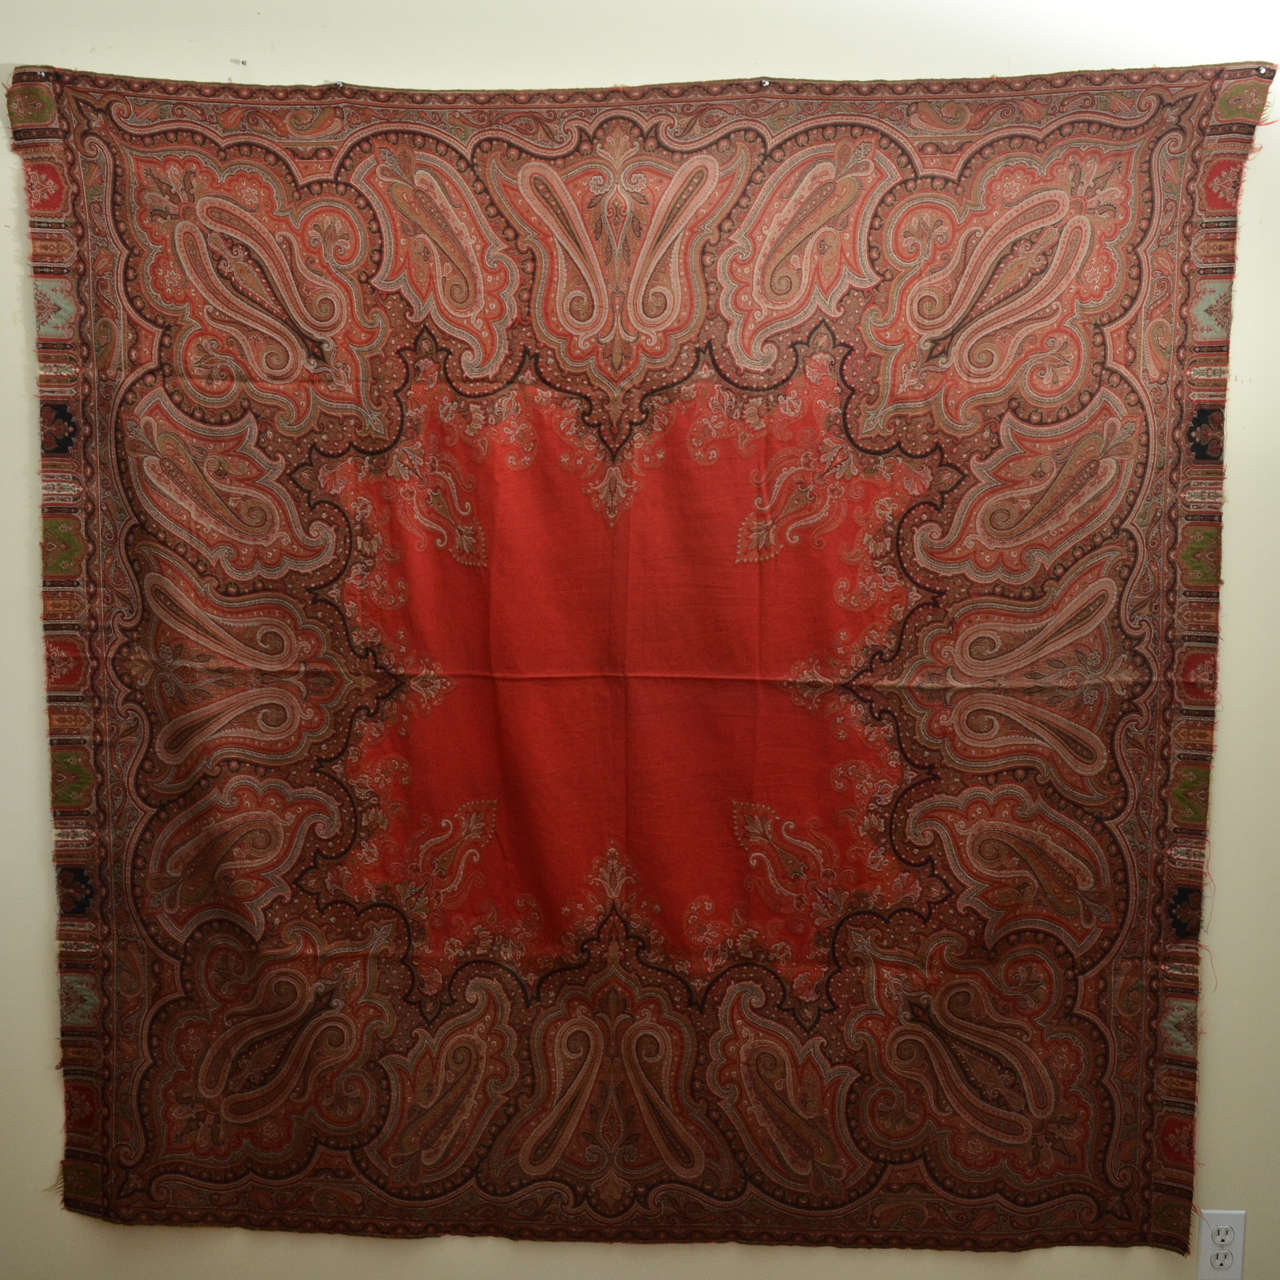 Mid-19th century square Paisley shawl with scarlet red center, surrounded by 